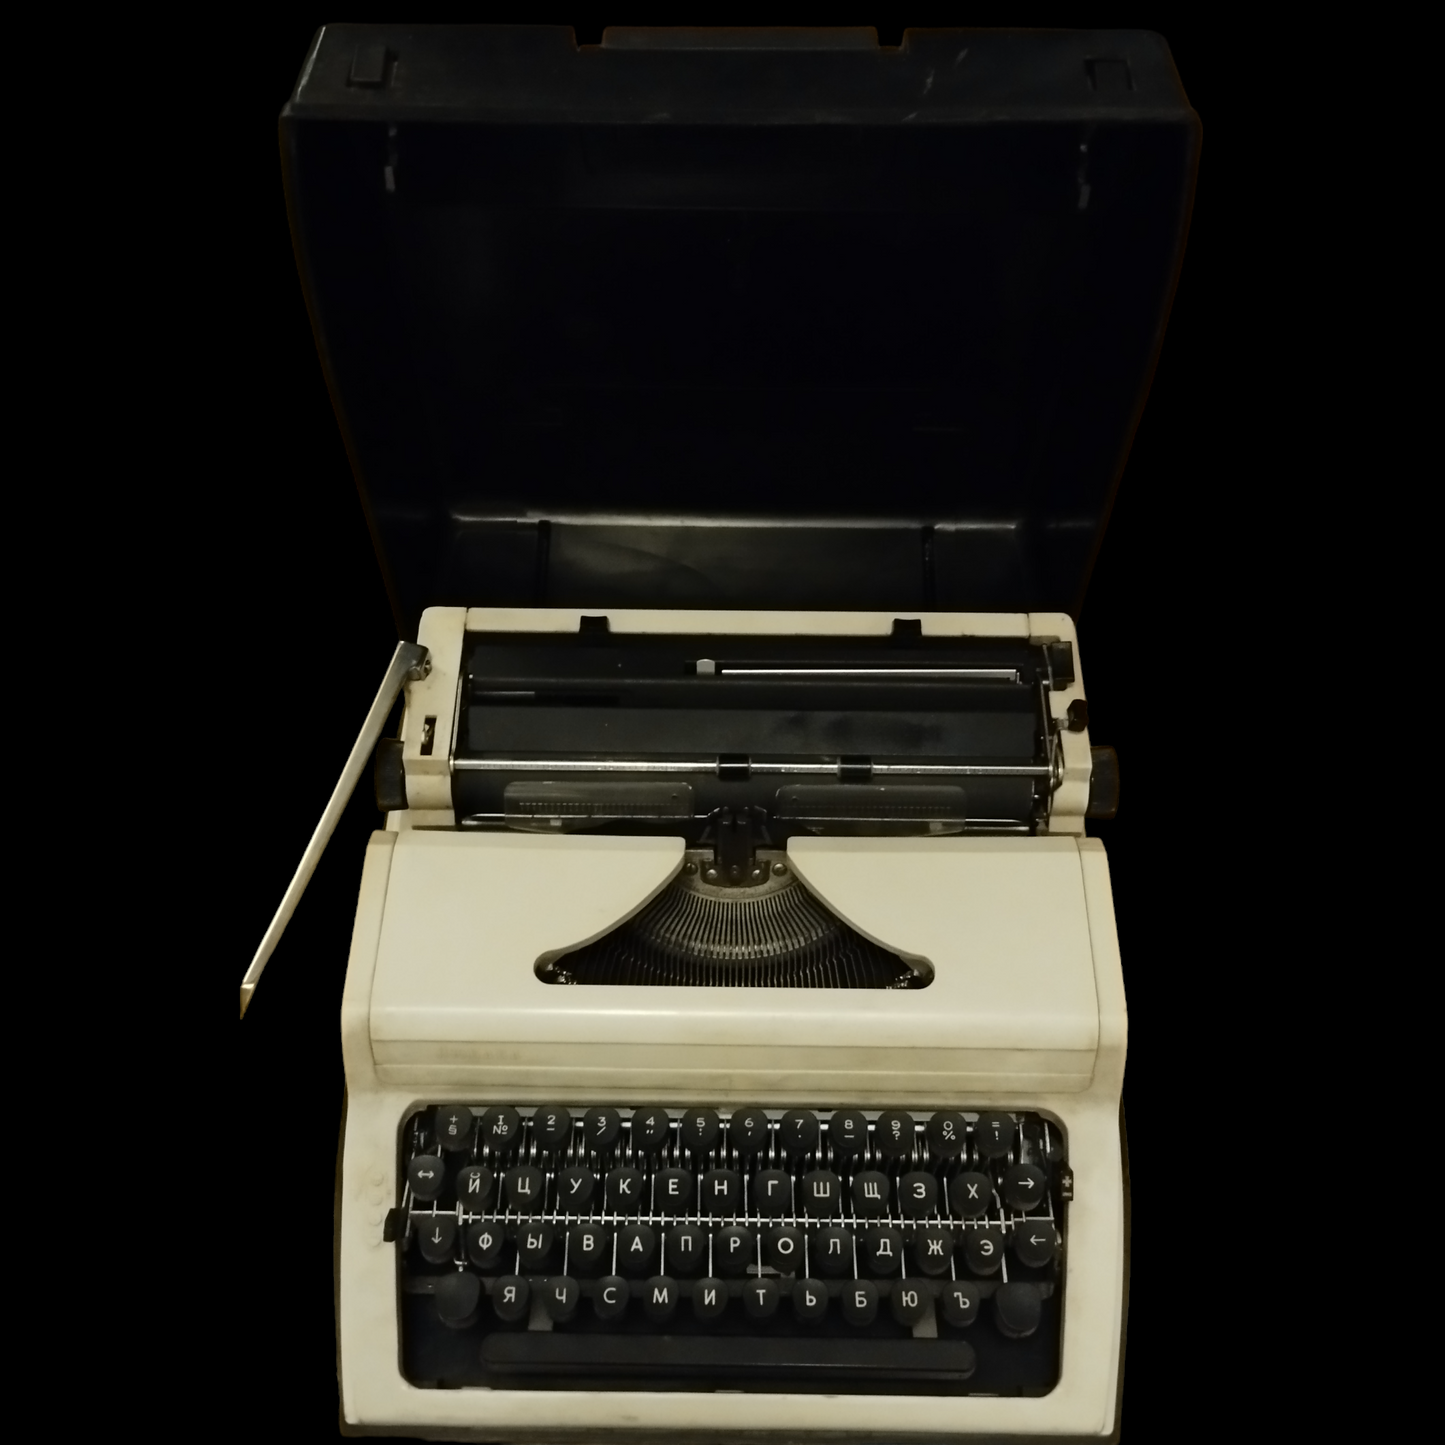 Image of Russian Keyboard Typewriter. Available from universaltypewritercompany.in